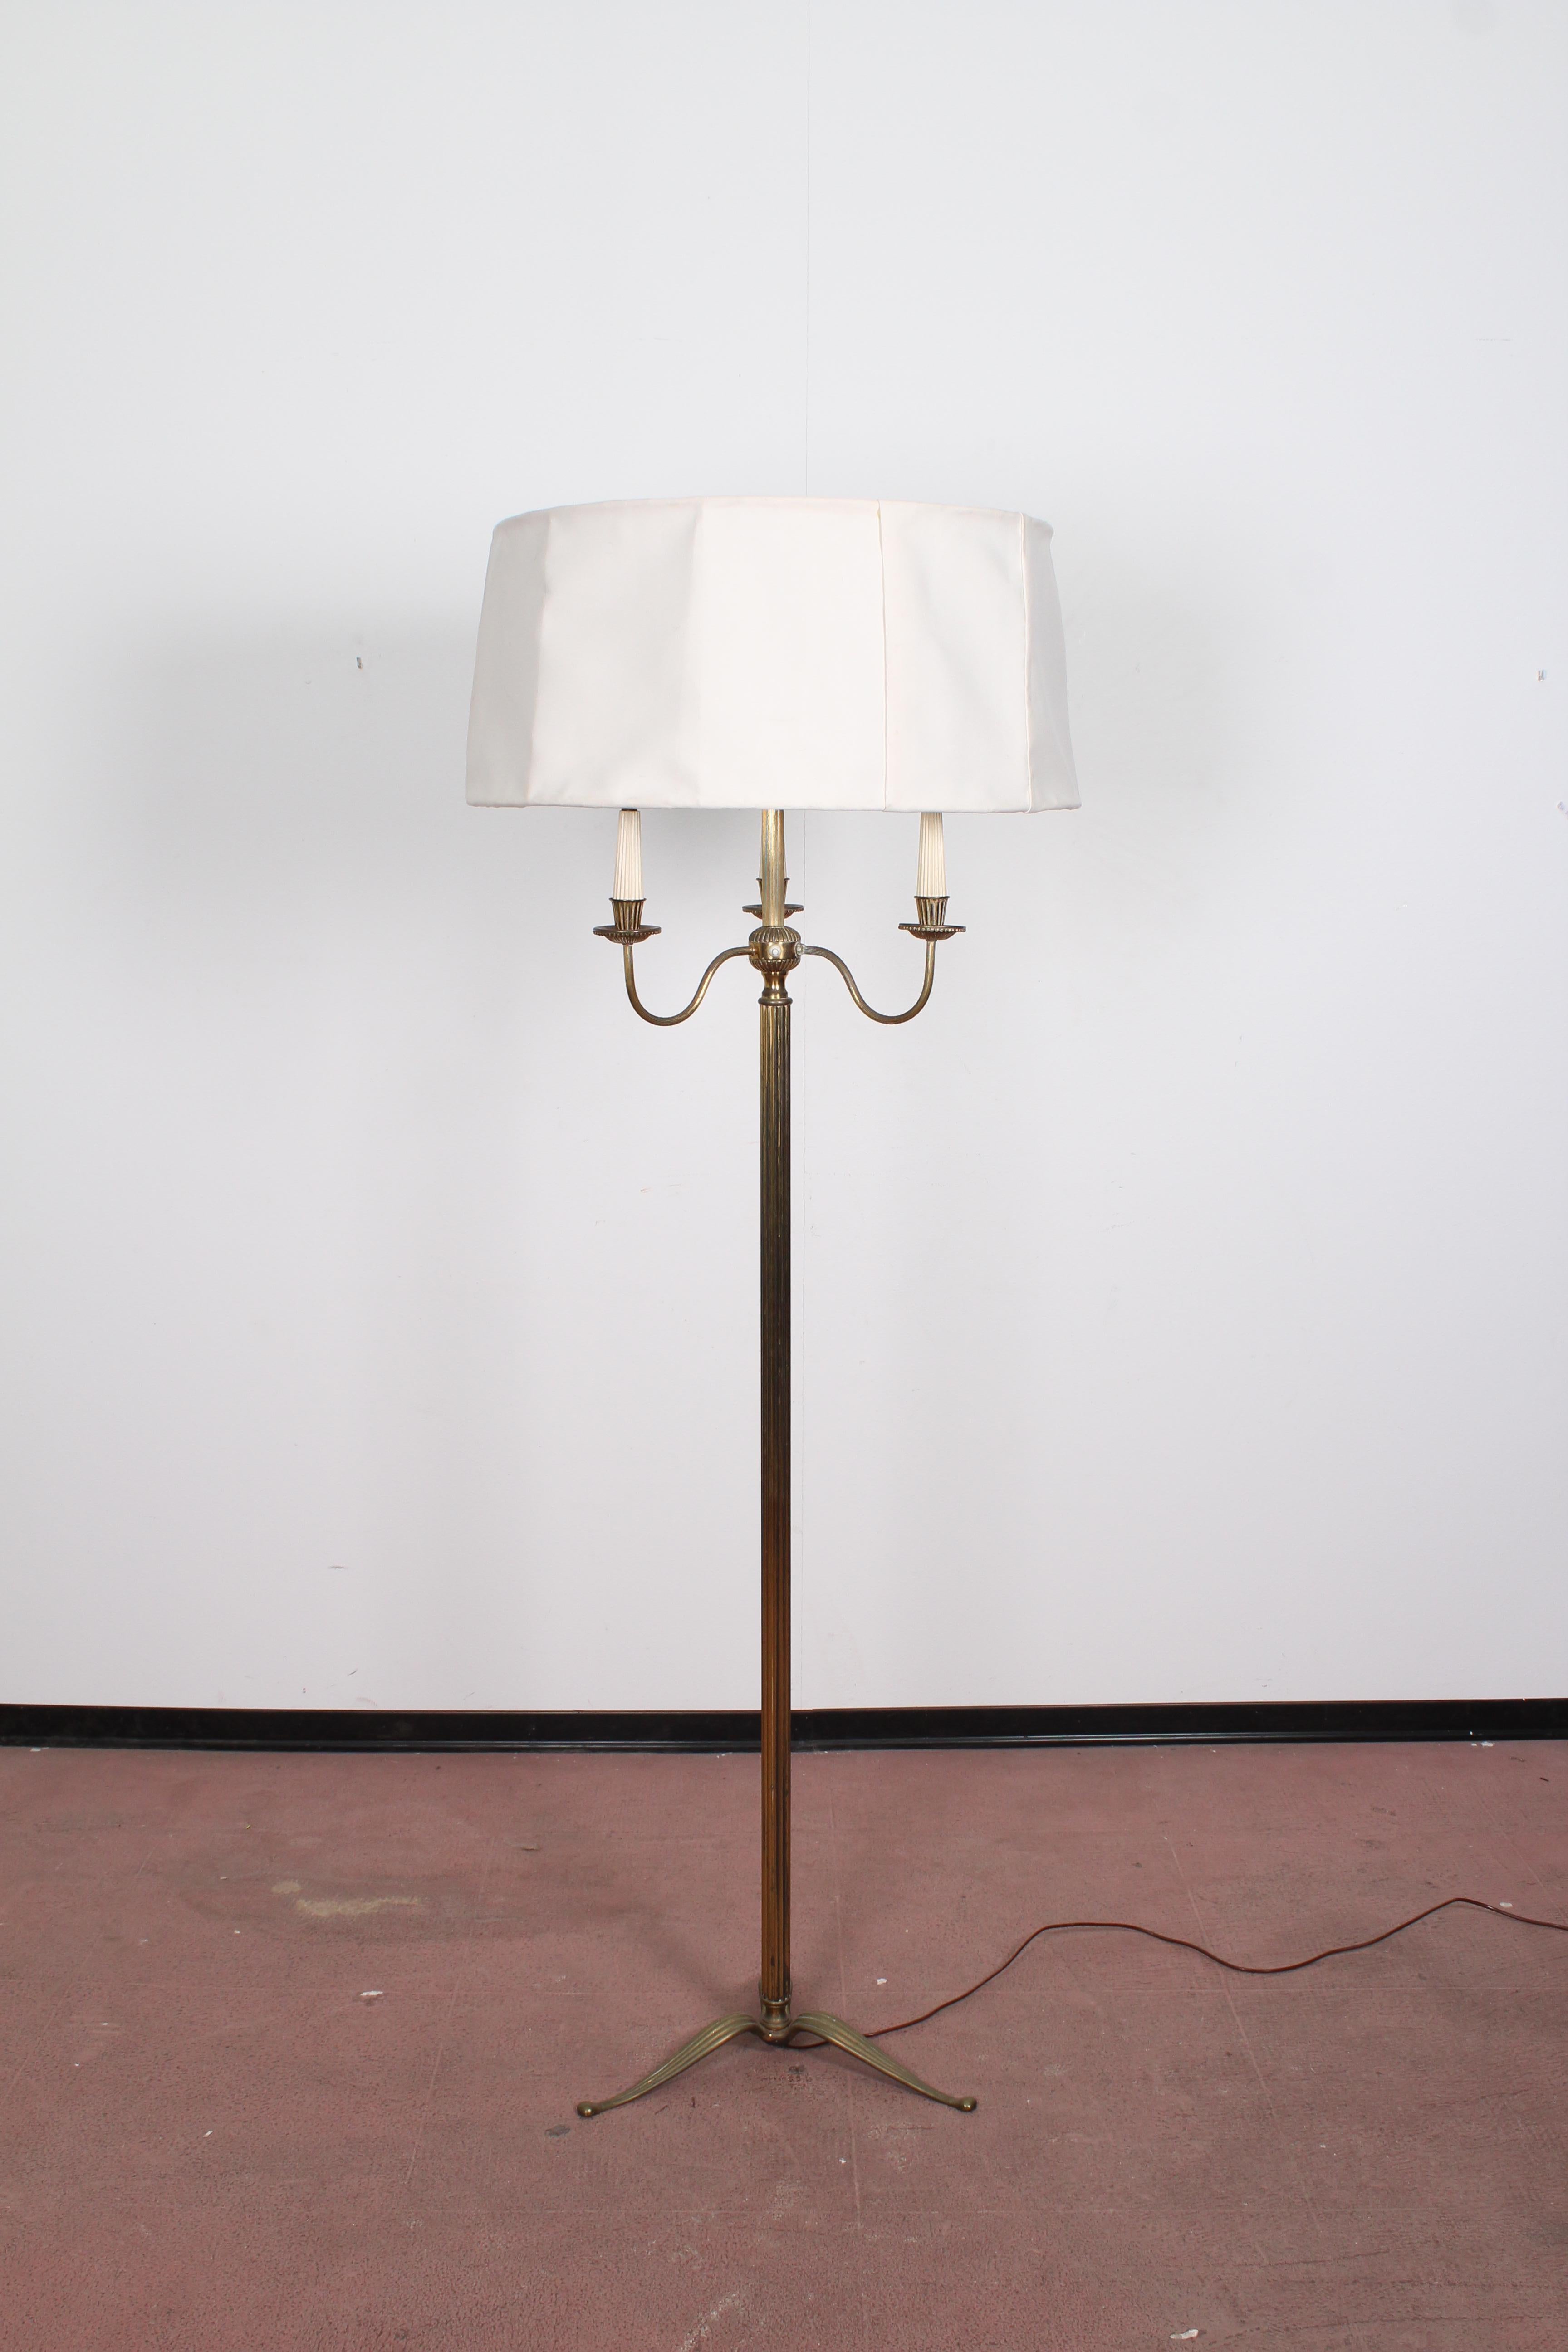 Beautiful brass floor lamp 1950s Stilnovo style with 4 lights.
Wear consistent with age and use.